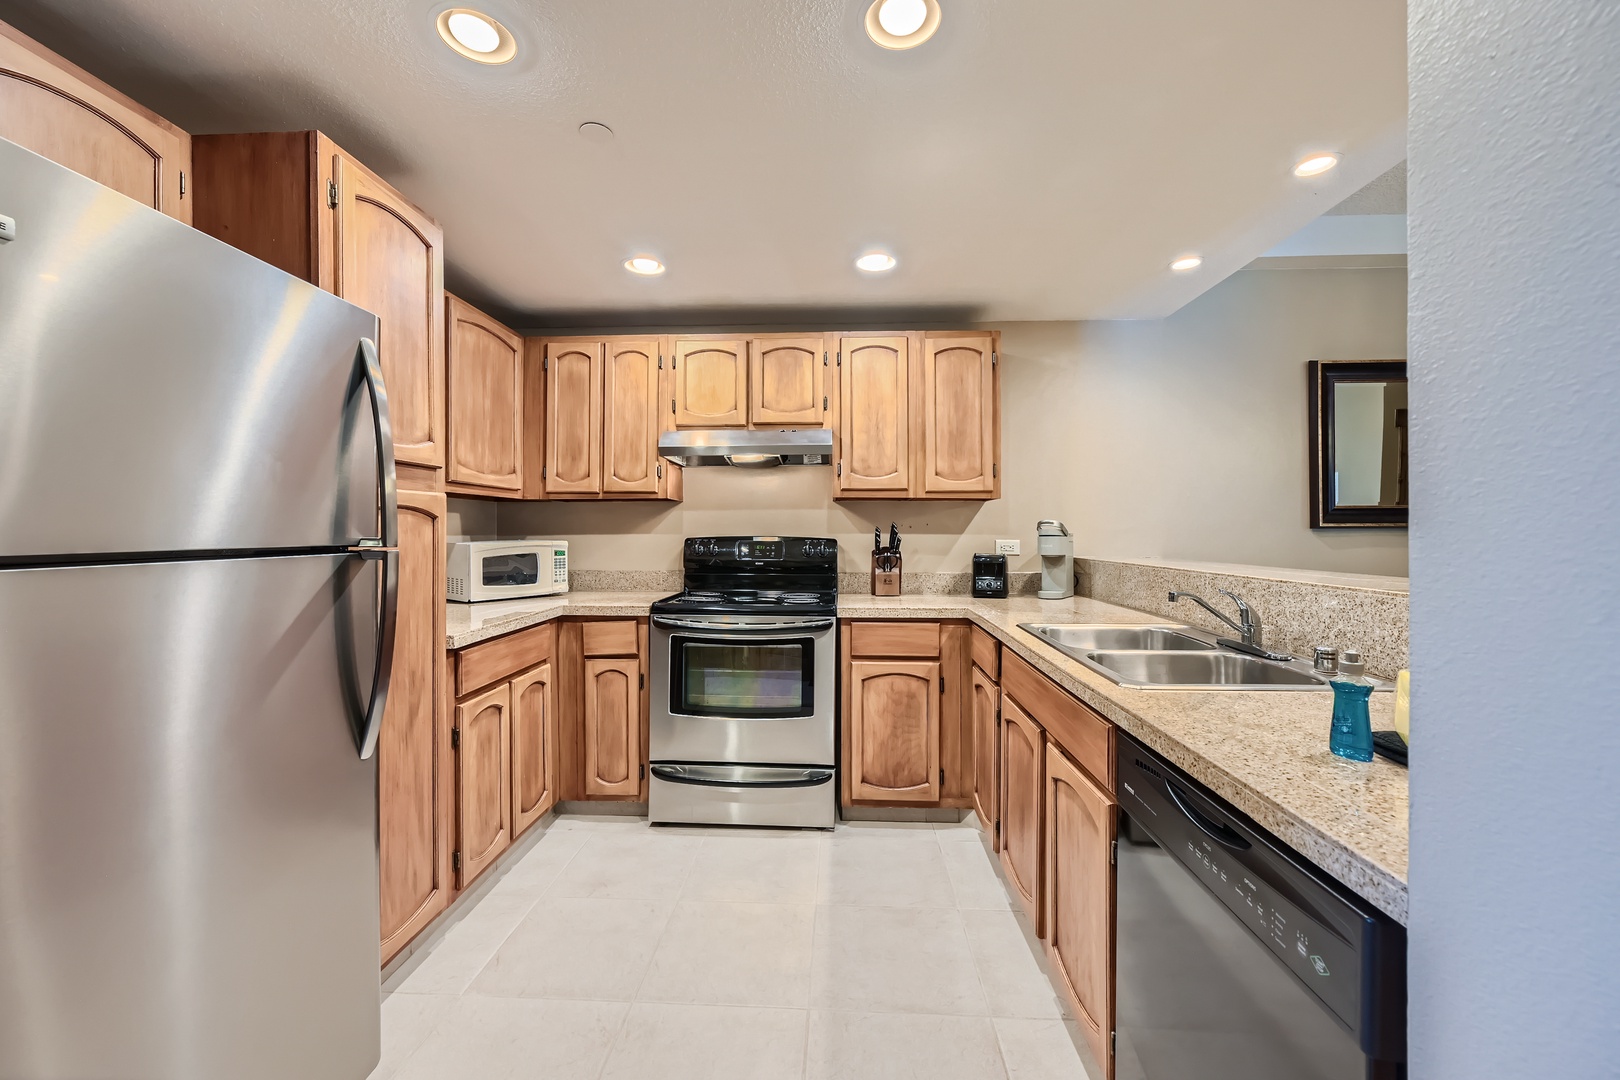 The kitchen provides abundant storage and all the conveniences of home